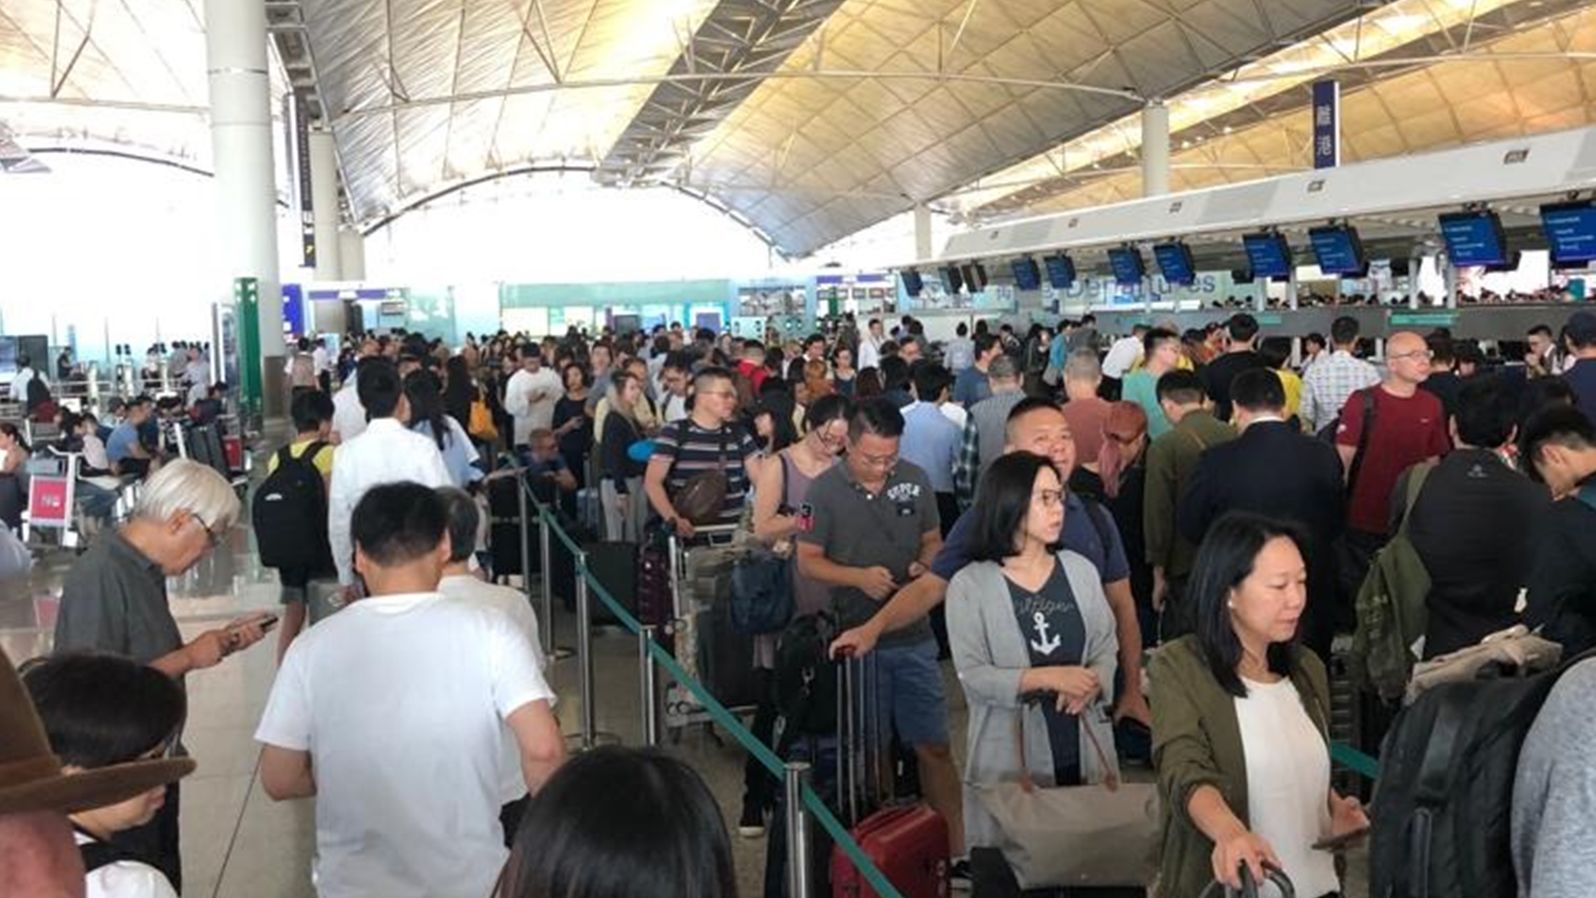 Business class check-in at Hong Kong airport as flights canceled due to citywide strikes on August 5, 2019.